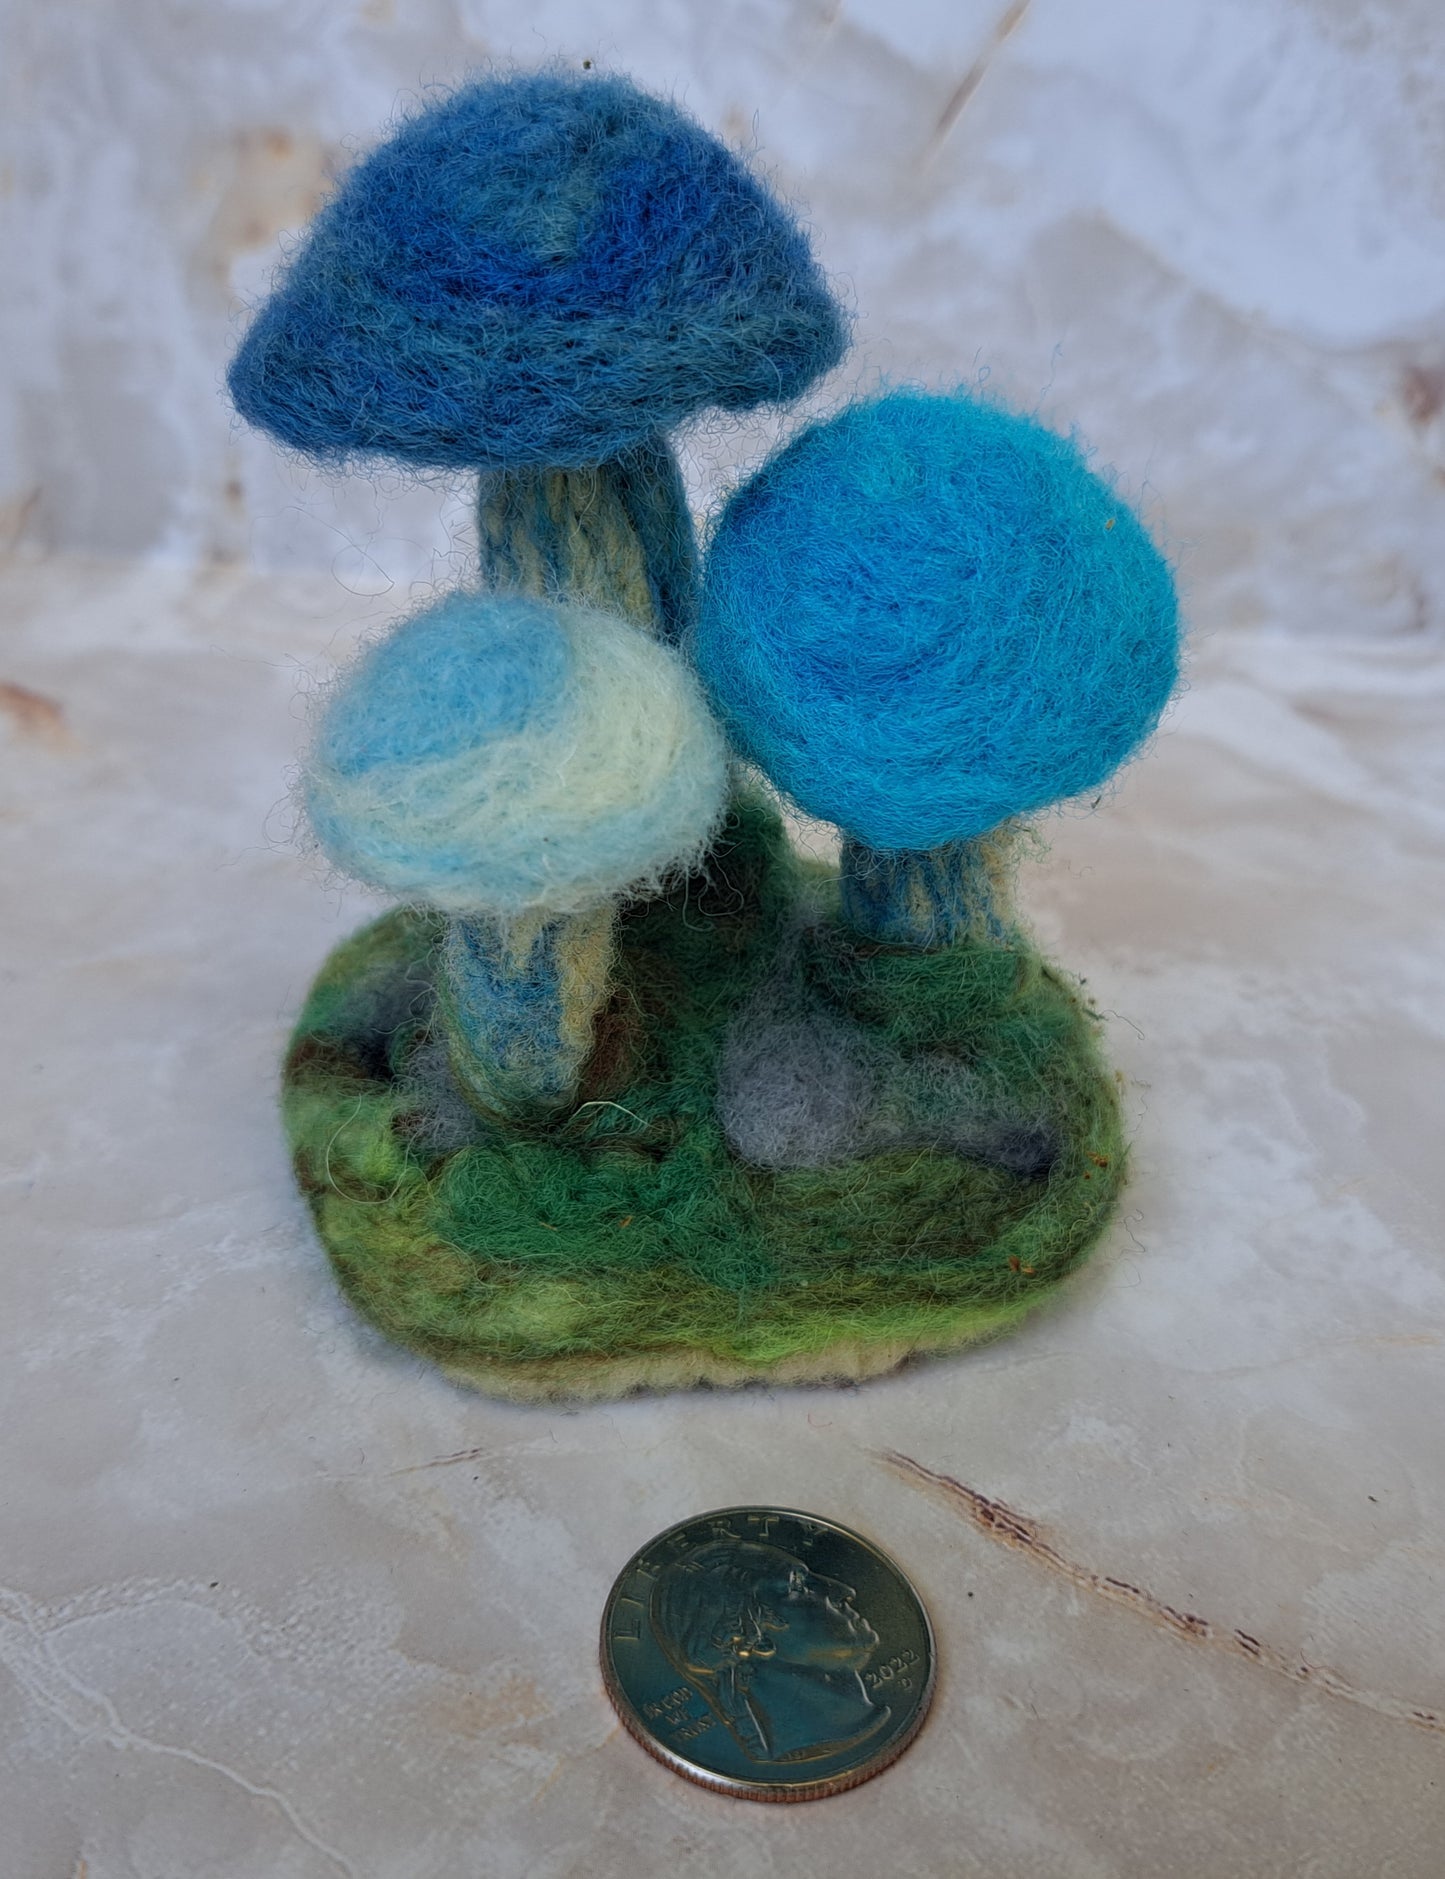 Blue Shroomscapes